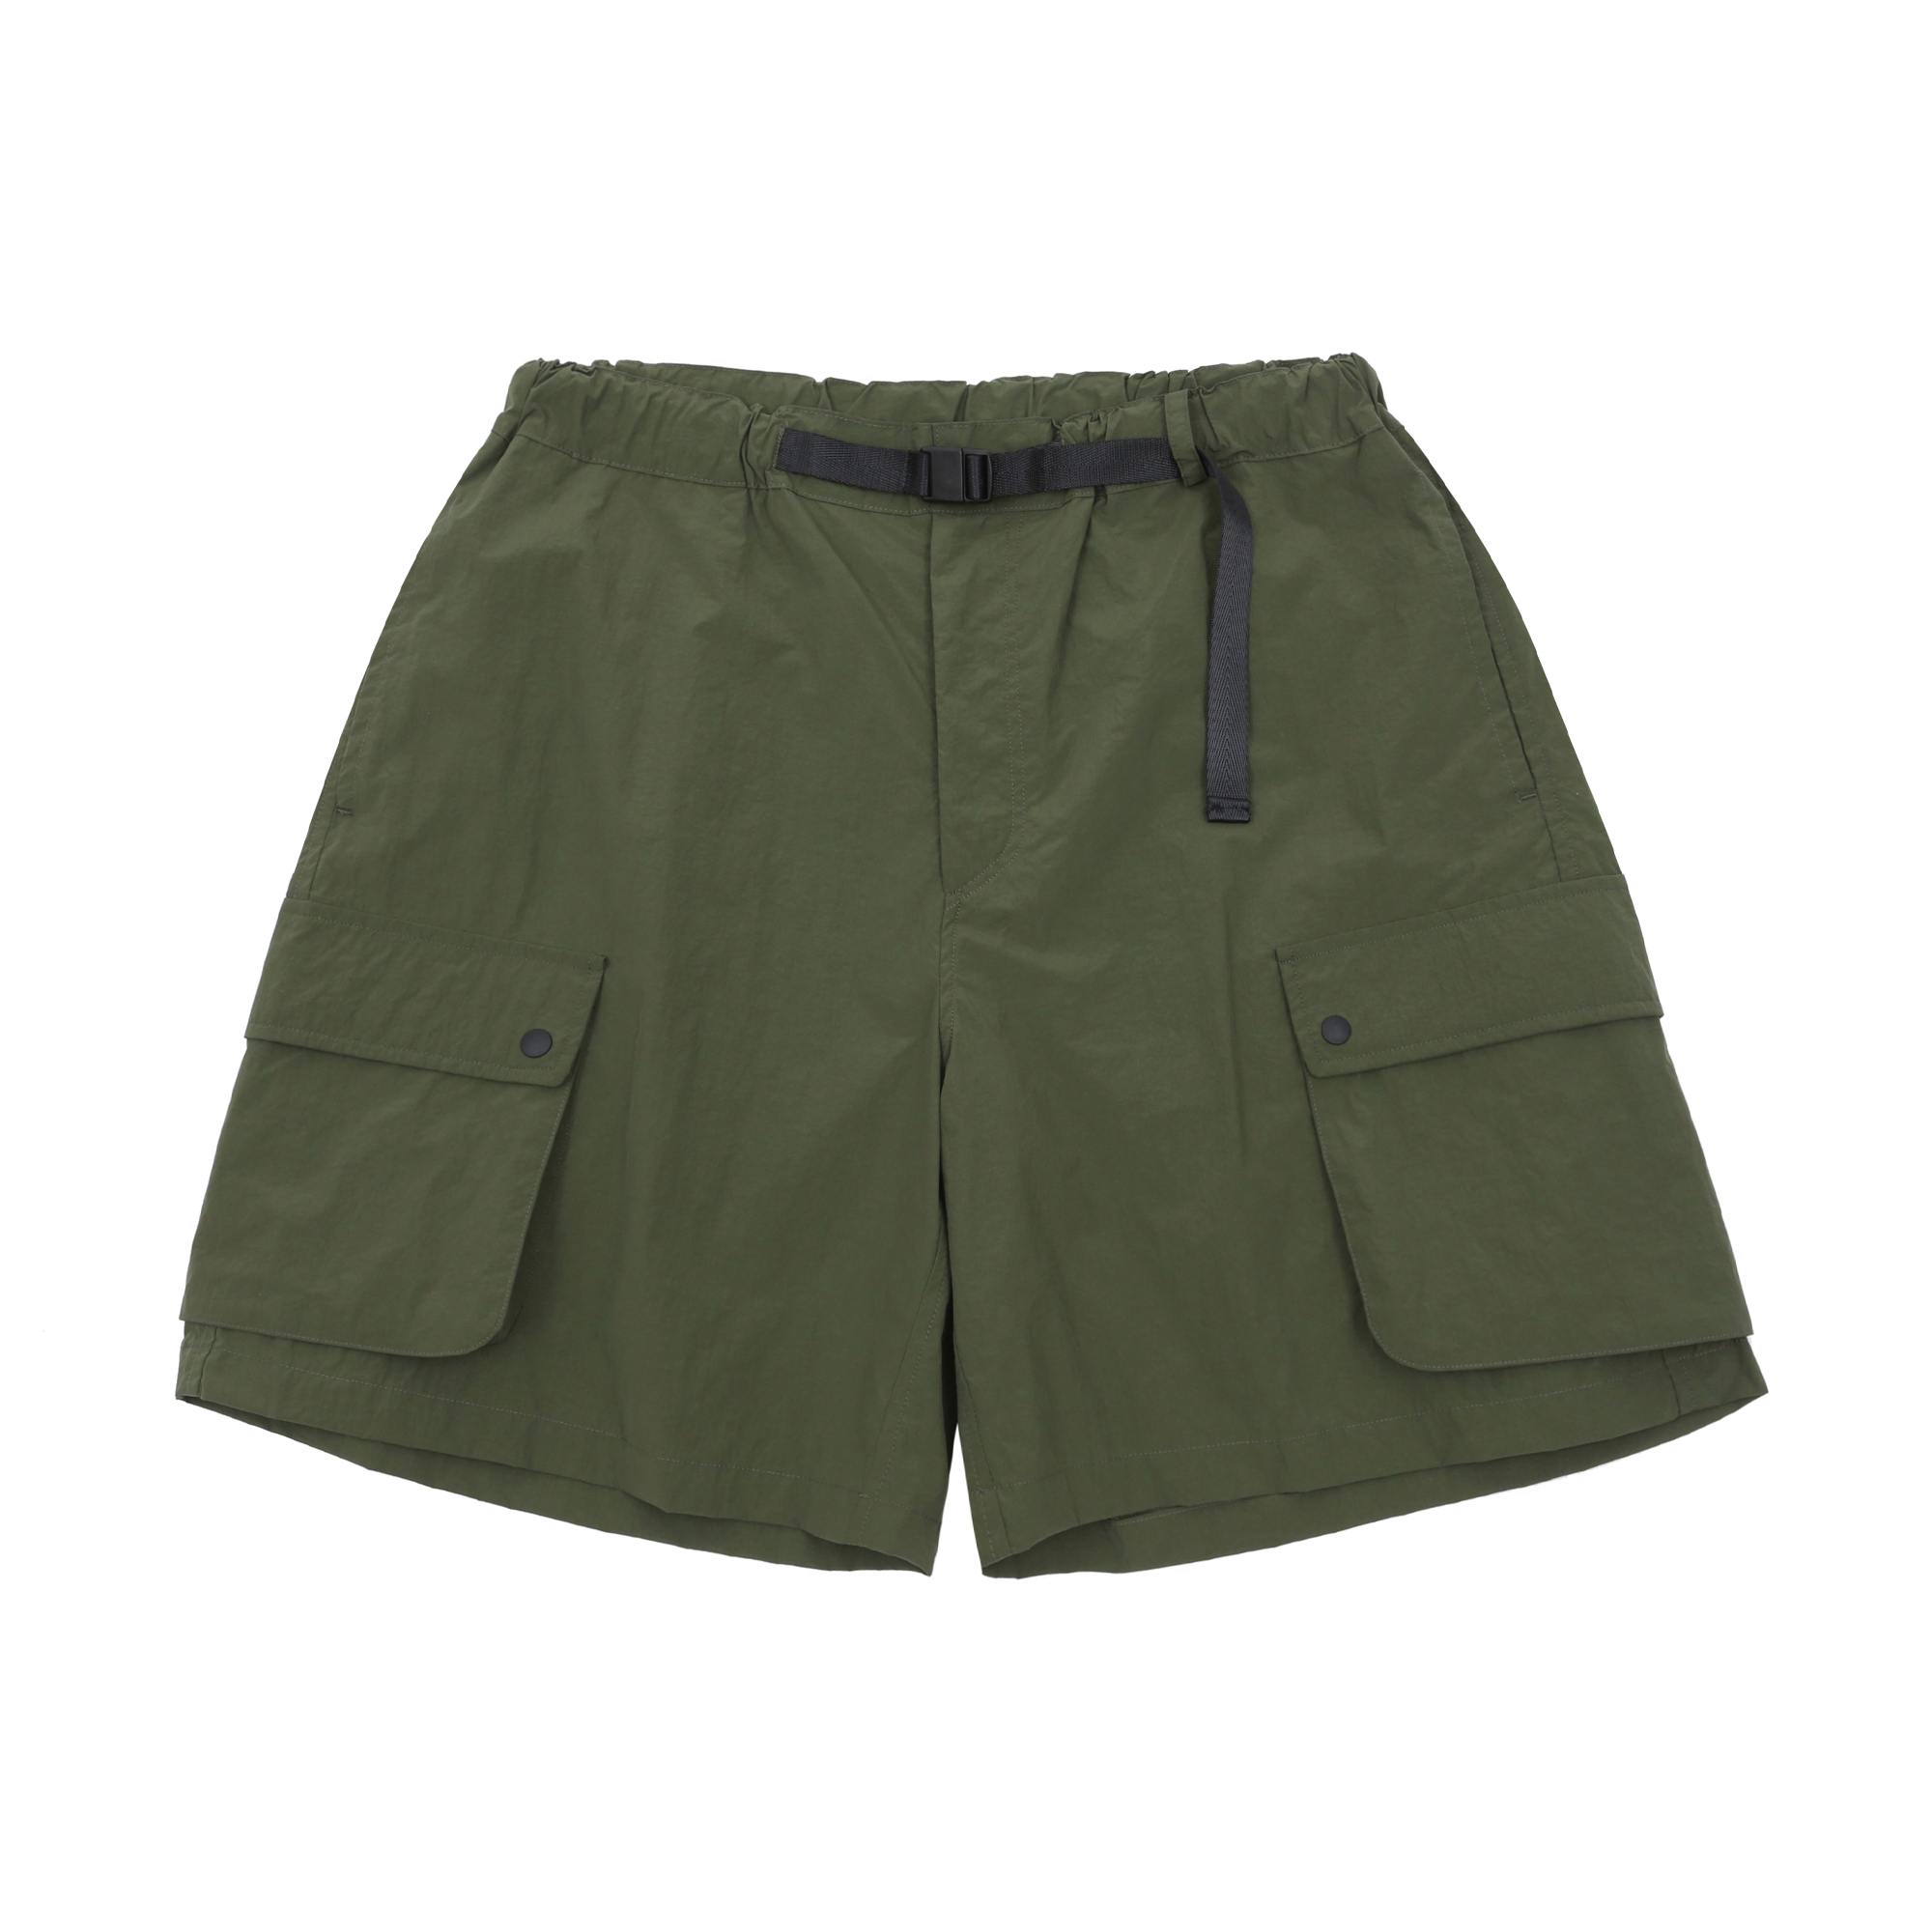 RUSTLE COMPACT SHORTS (OLIVE)